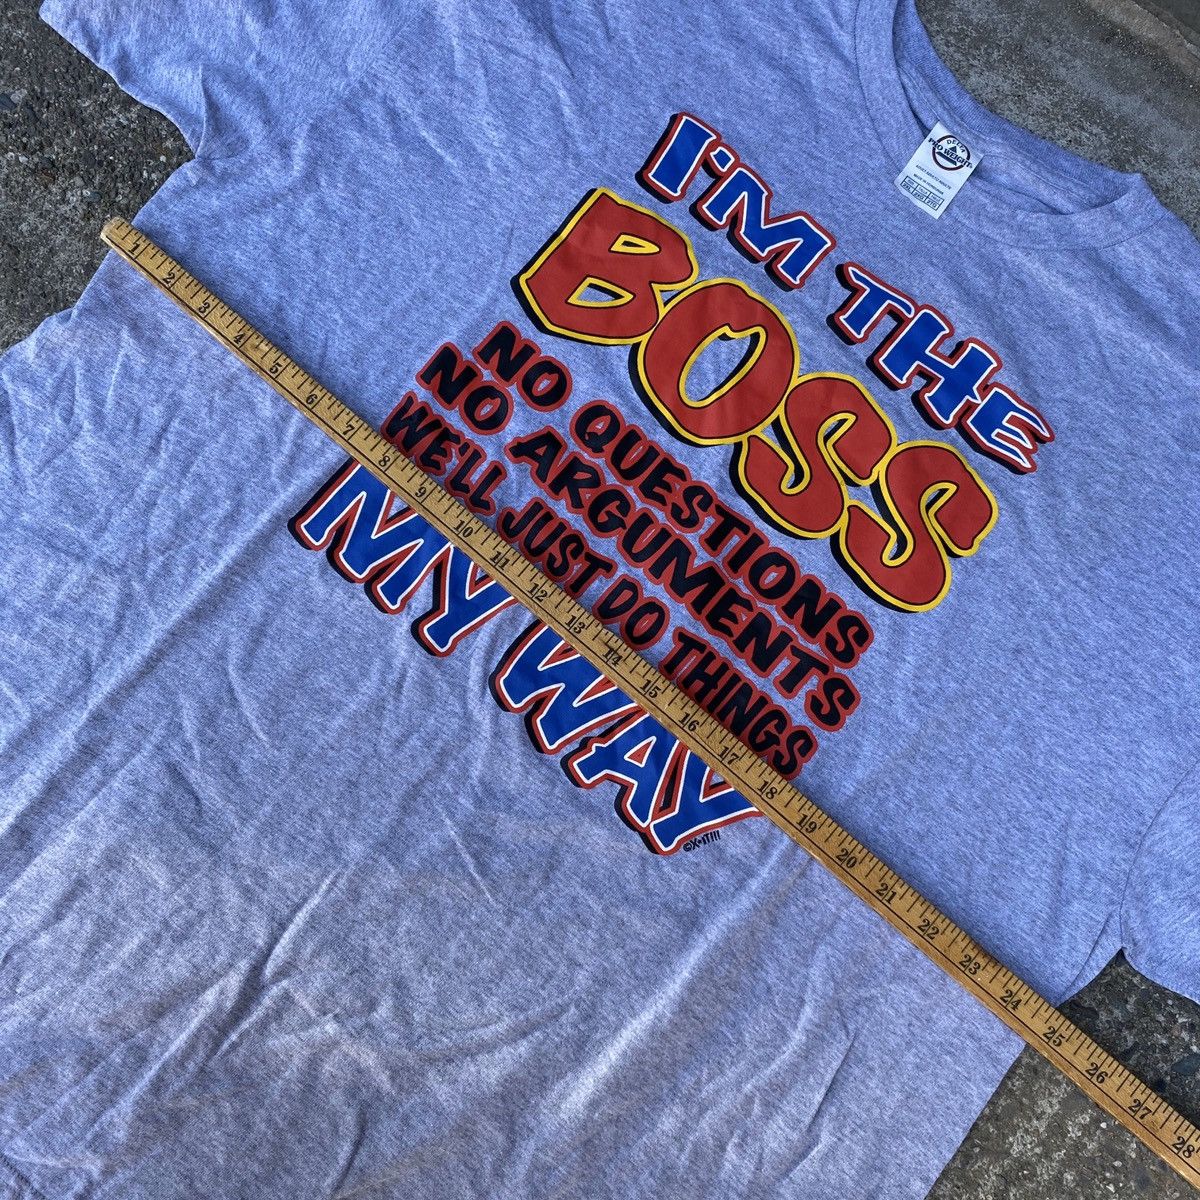 Vintage VINTAGE IM THE BOSS FUNNY IRONIC T SHIRT USA DELTA Y2K 90s Size US XXL / EU 58 / 5 - 2 Preview